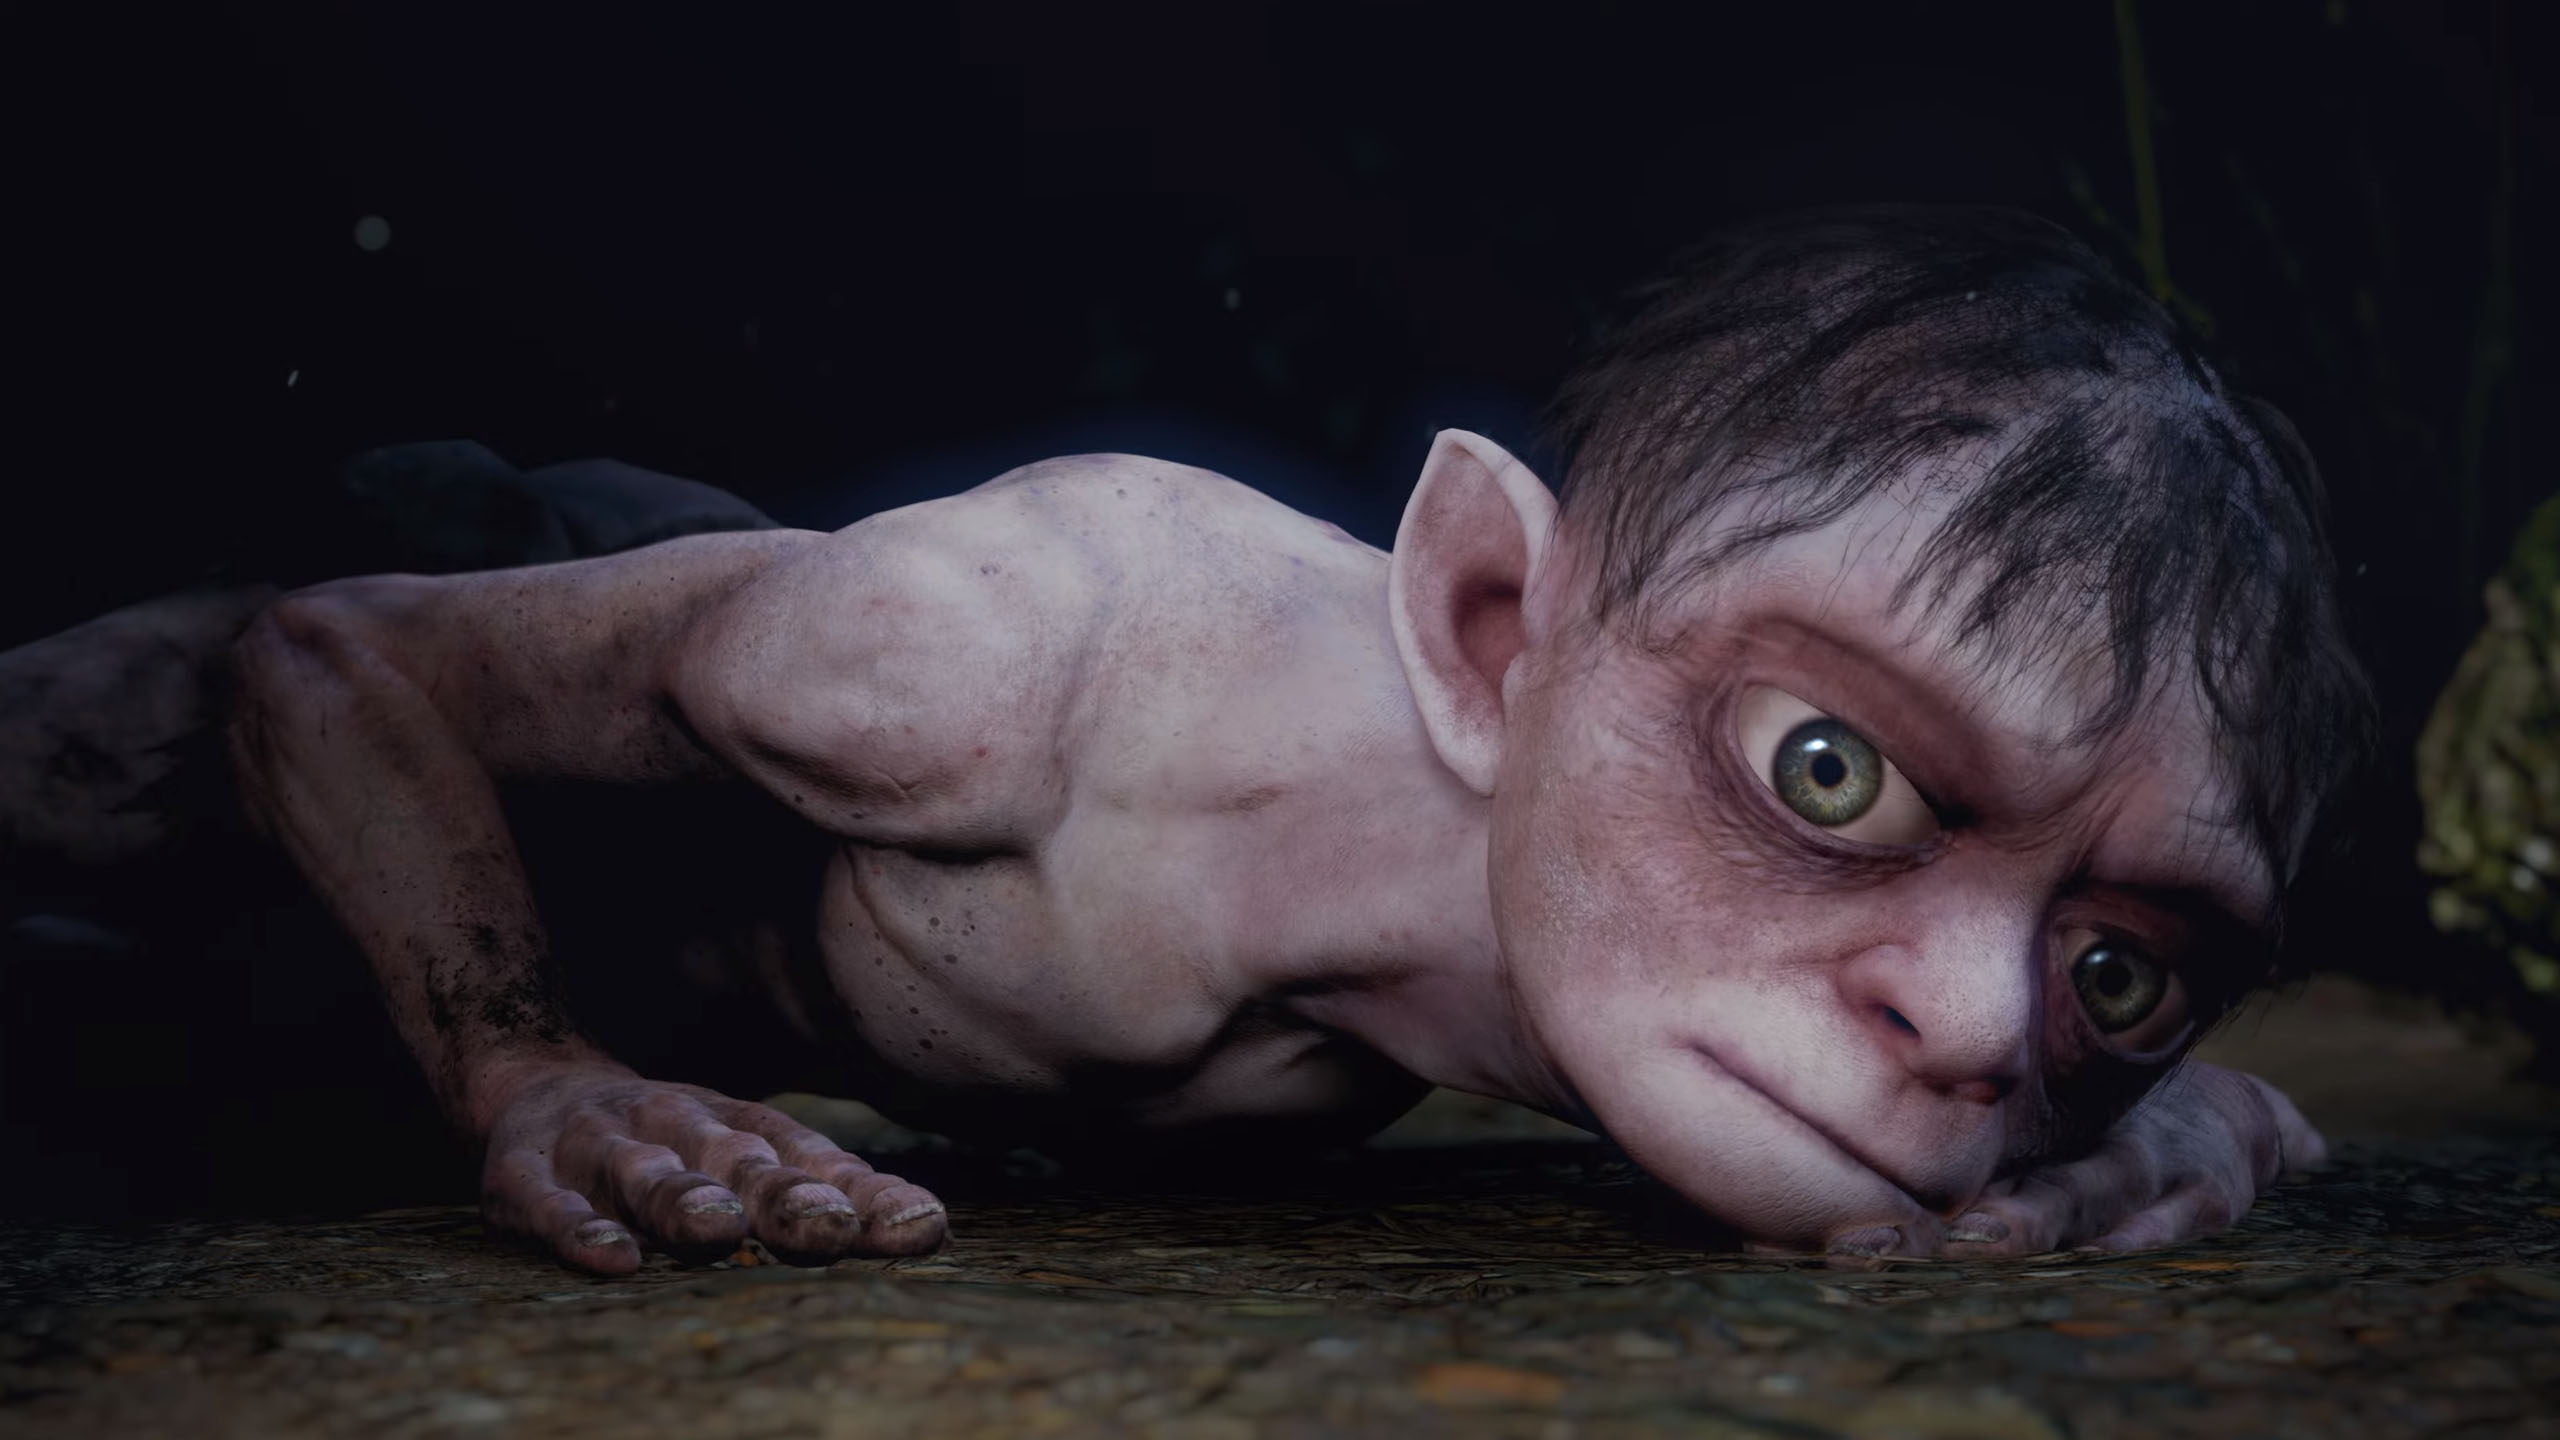 The Lord of the Rings: Gollum reintroduces Smeagol’s story in new trailer